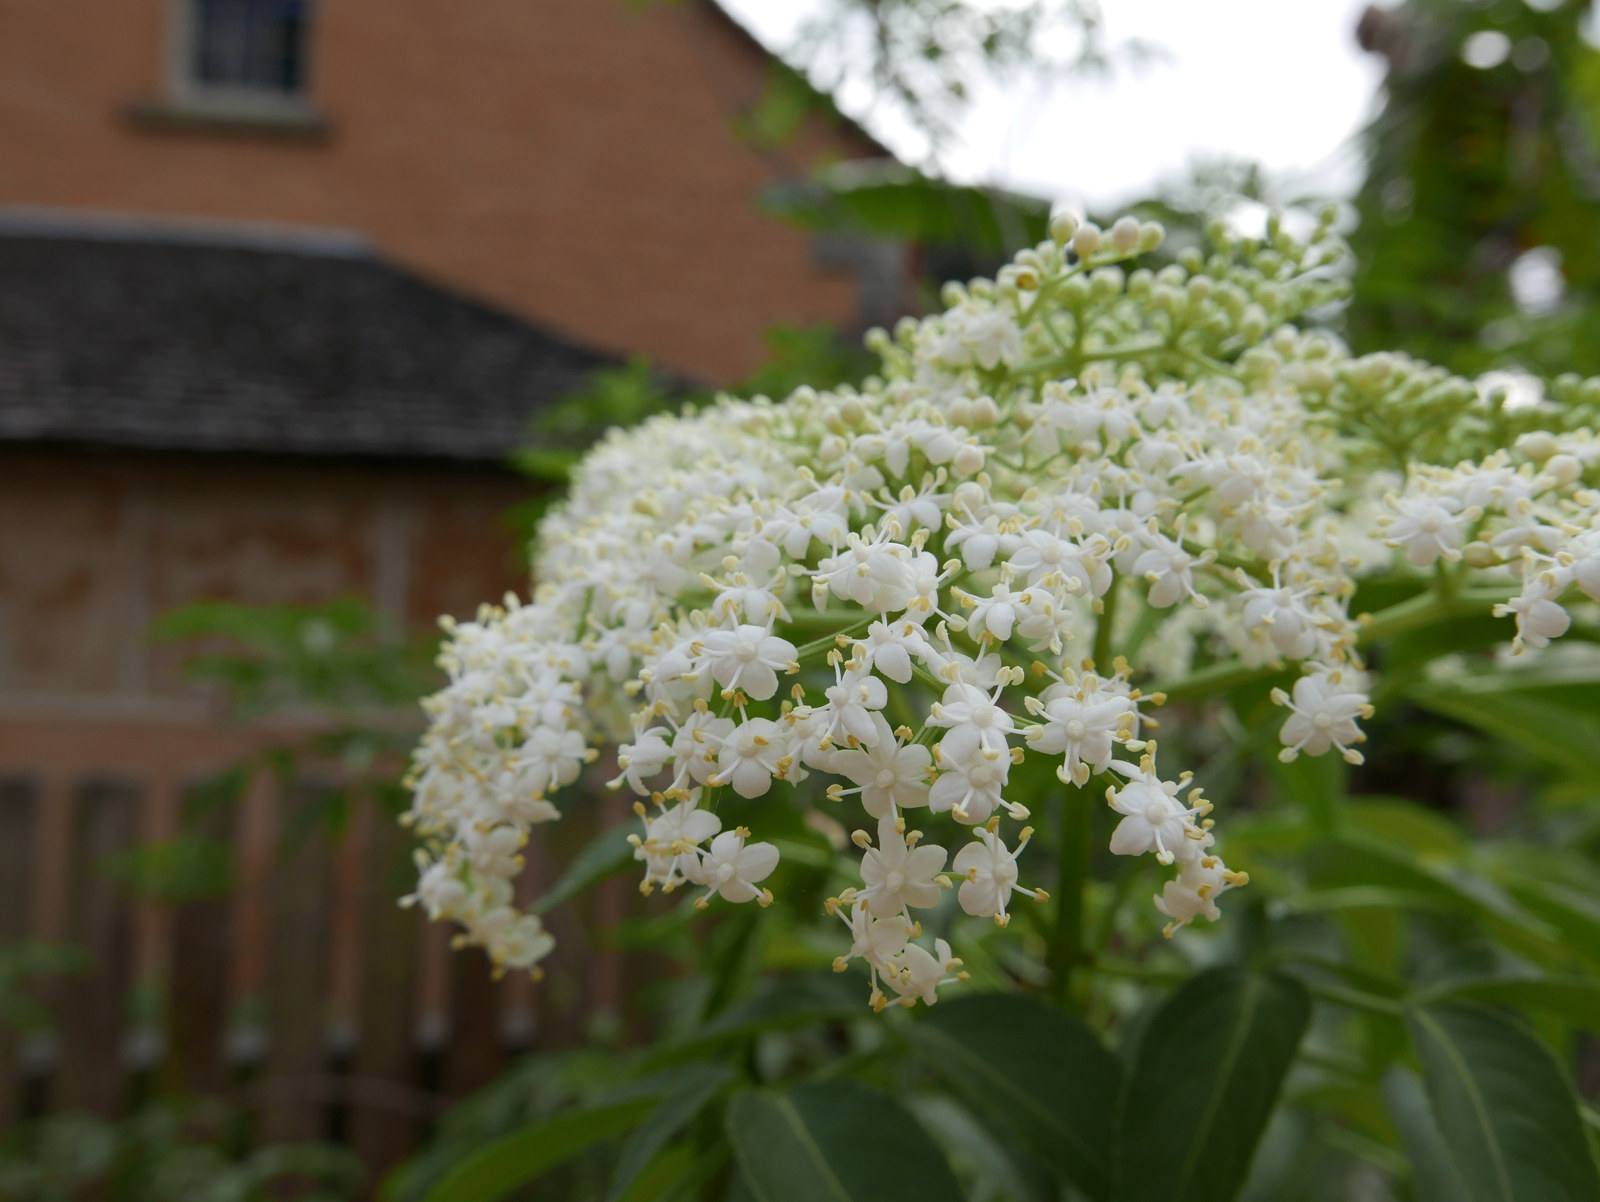 The white flowers of the elderberry at Vaucluse House